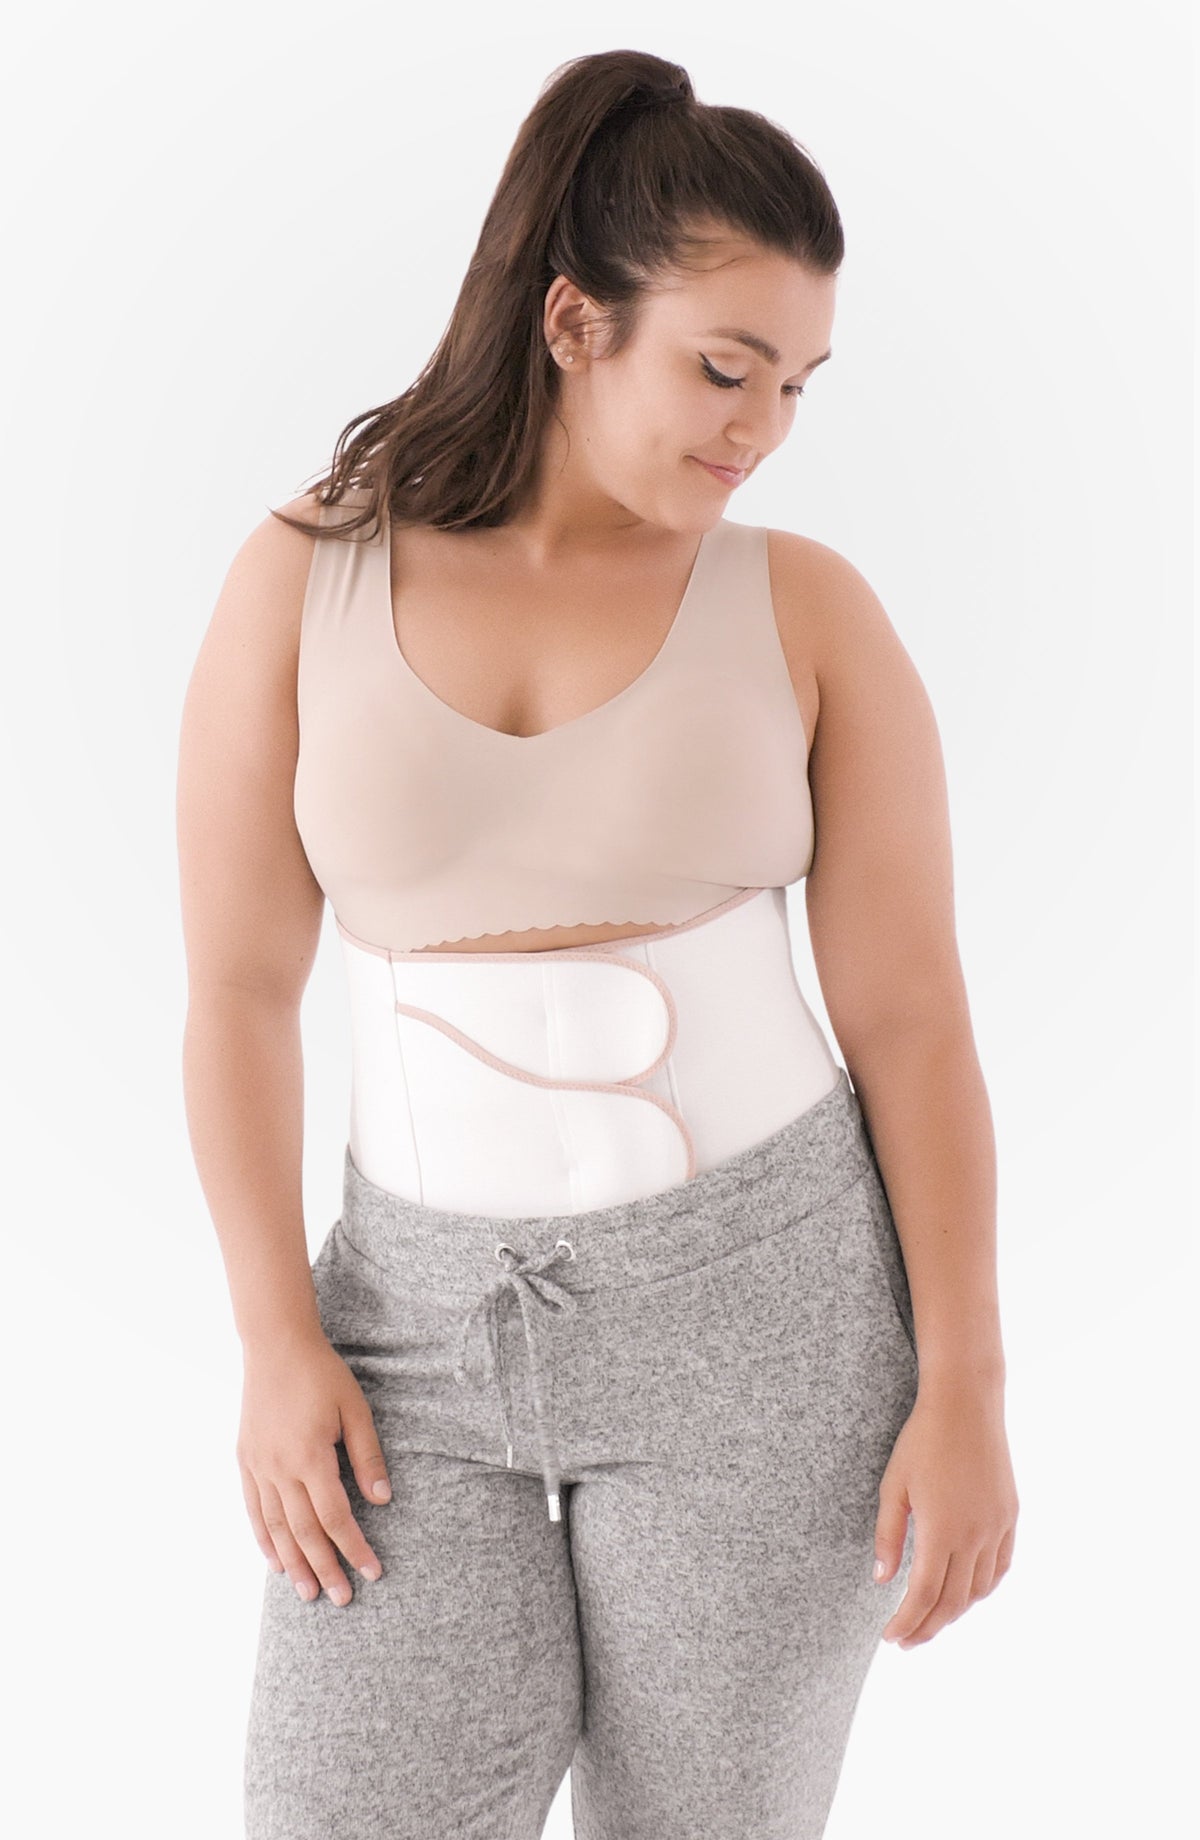 Pin on Plus Size Postpartum Support